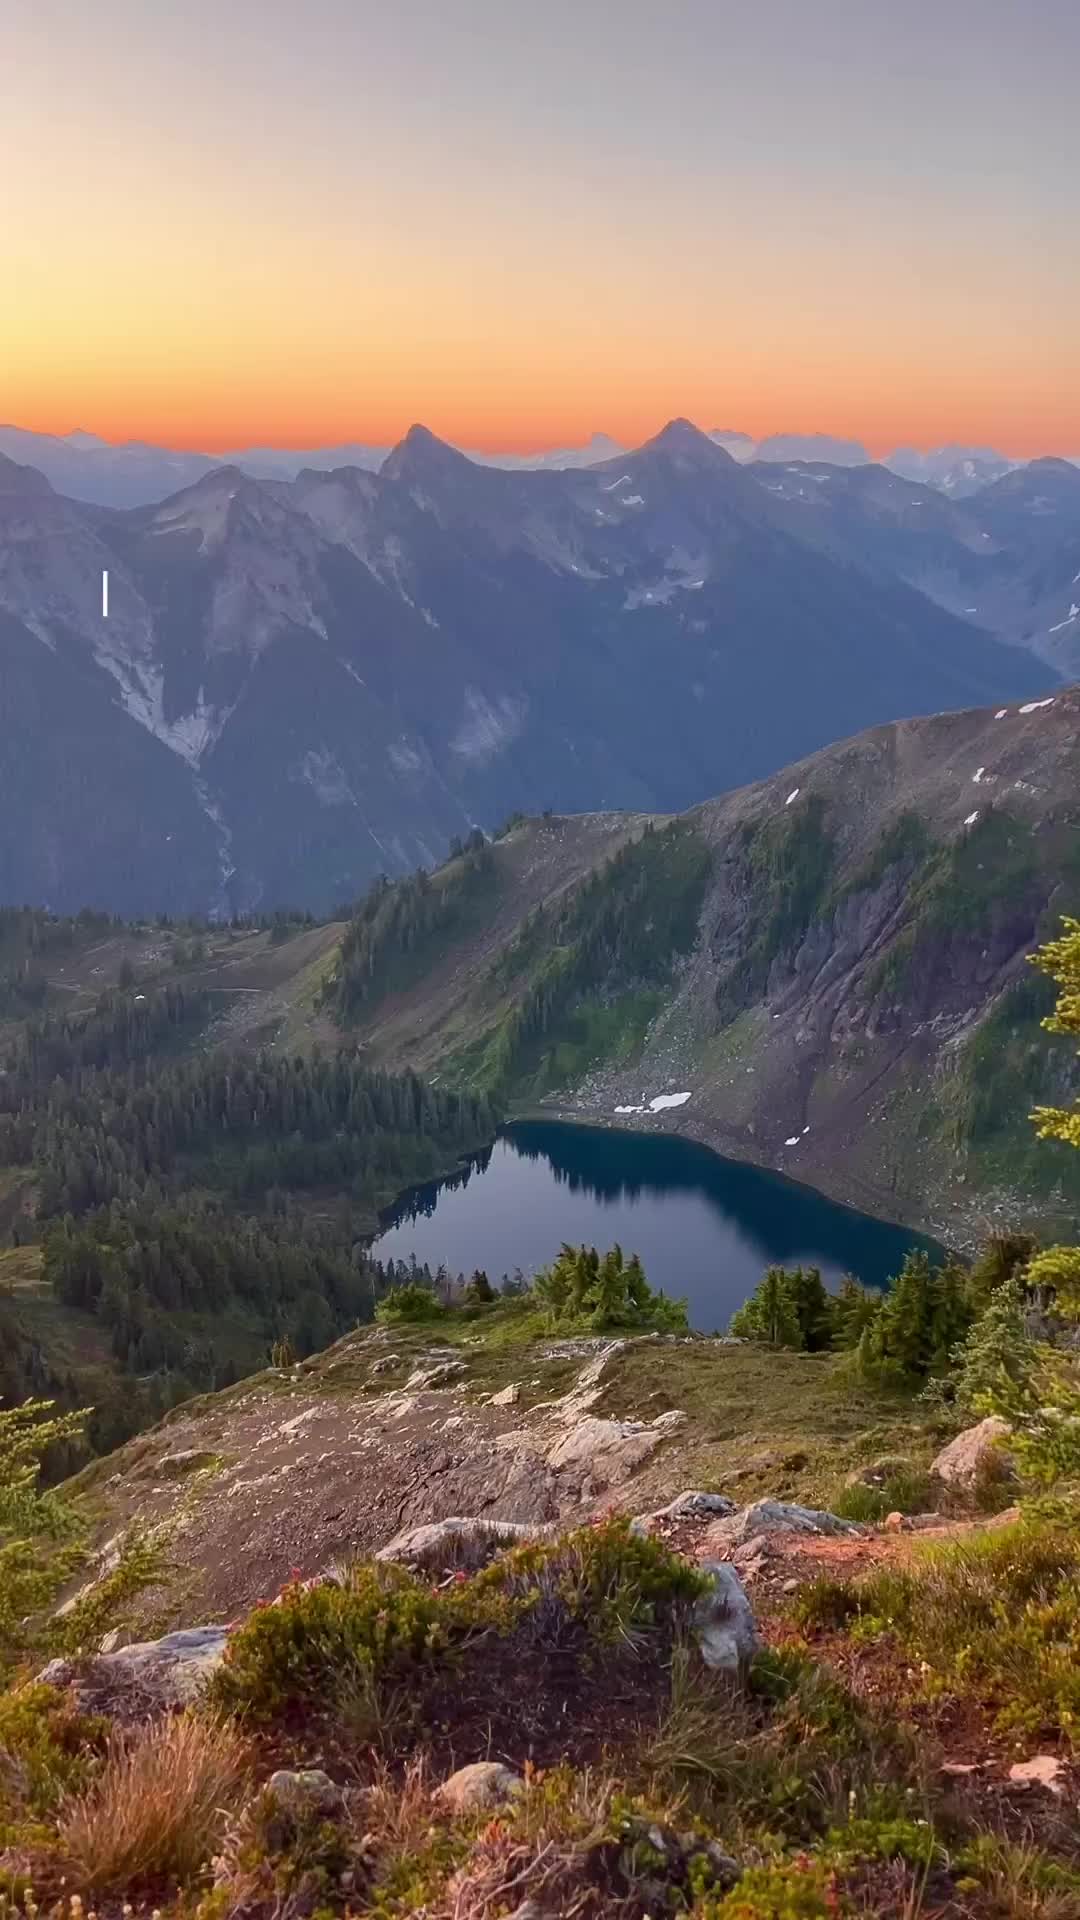 Waking Up Early in North Cascades National Park